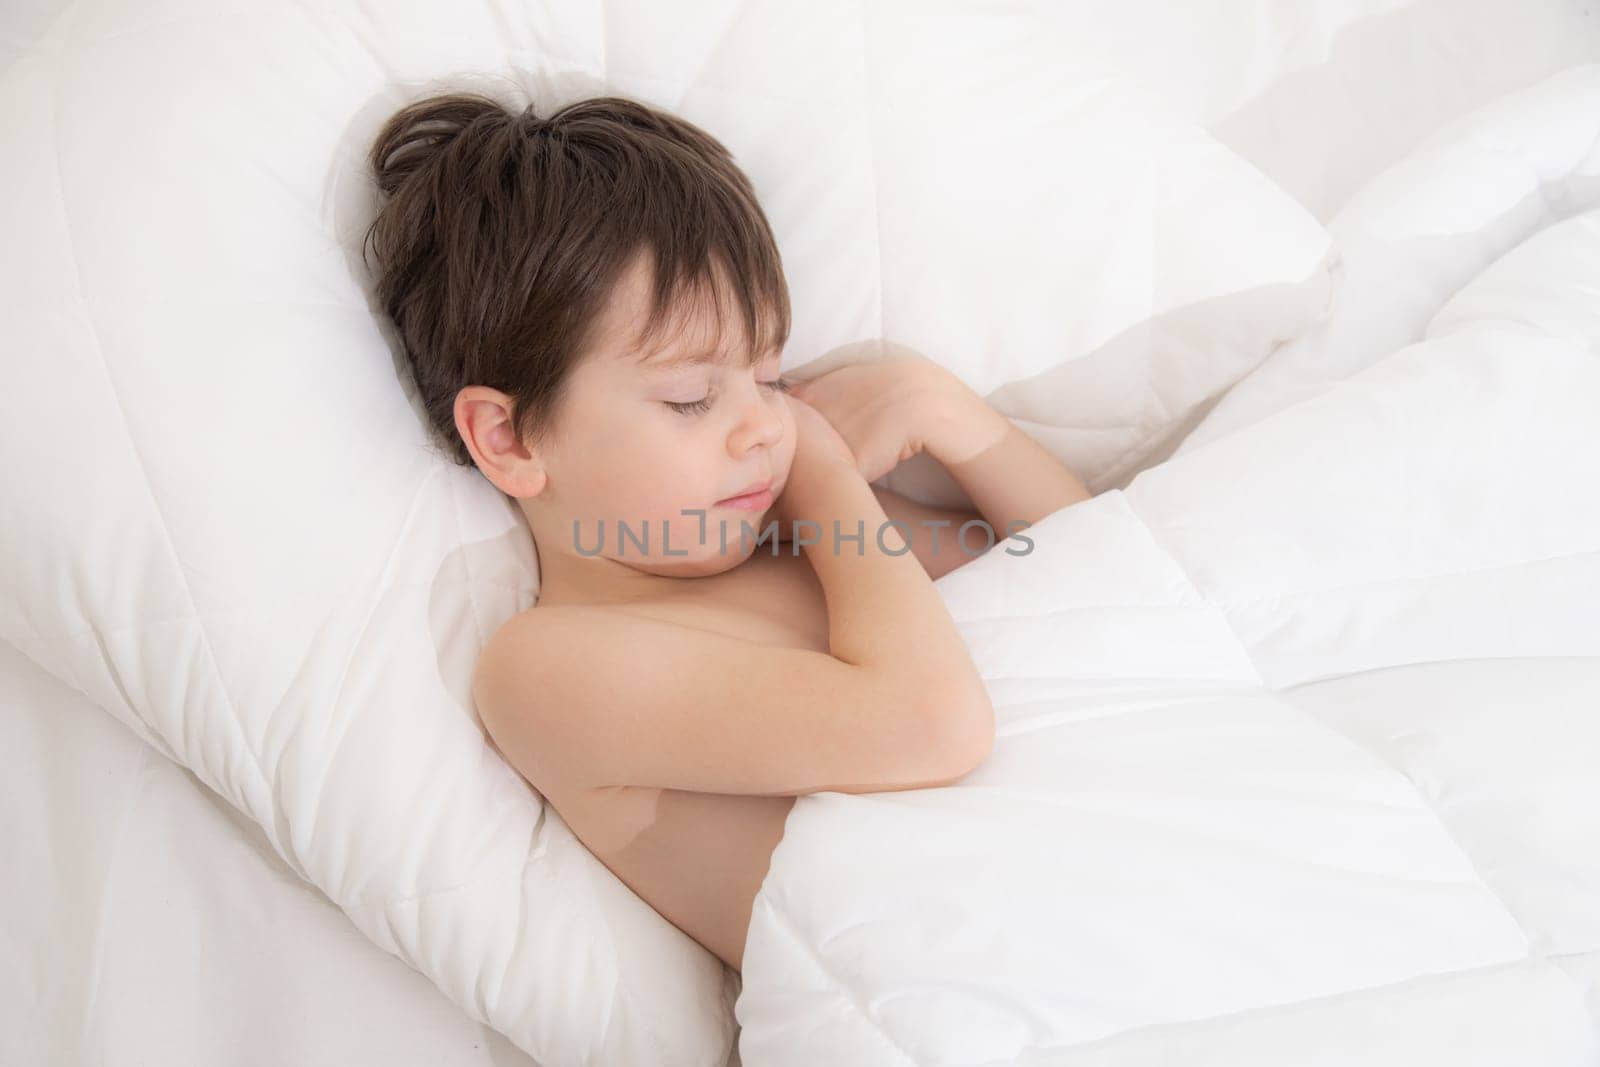 The child is sleeping sweetly in his bed . Sweet baby's dream. The child is in bed . An article about children's dreams. Boy